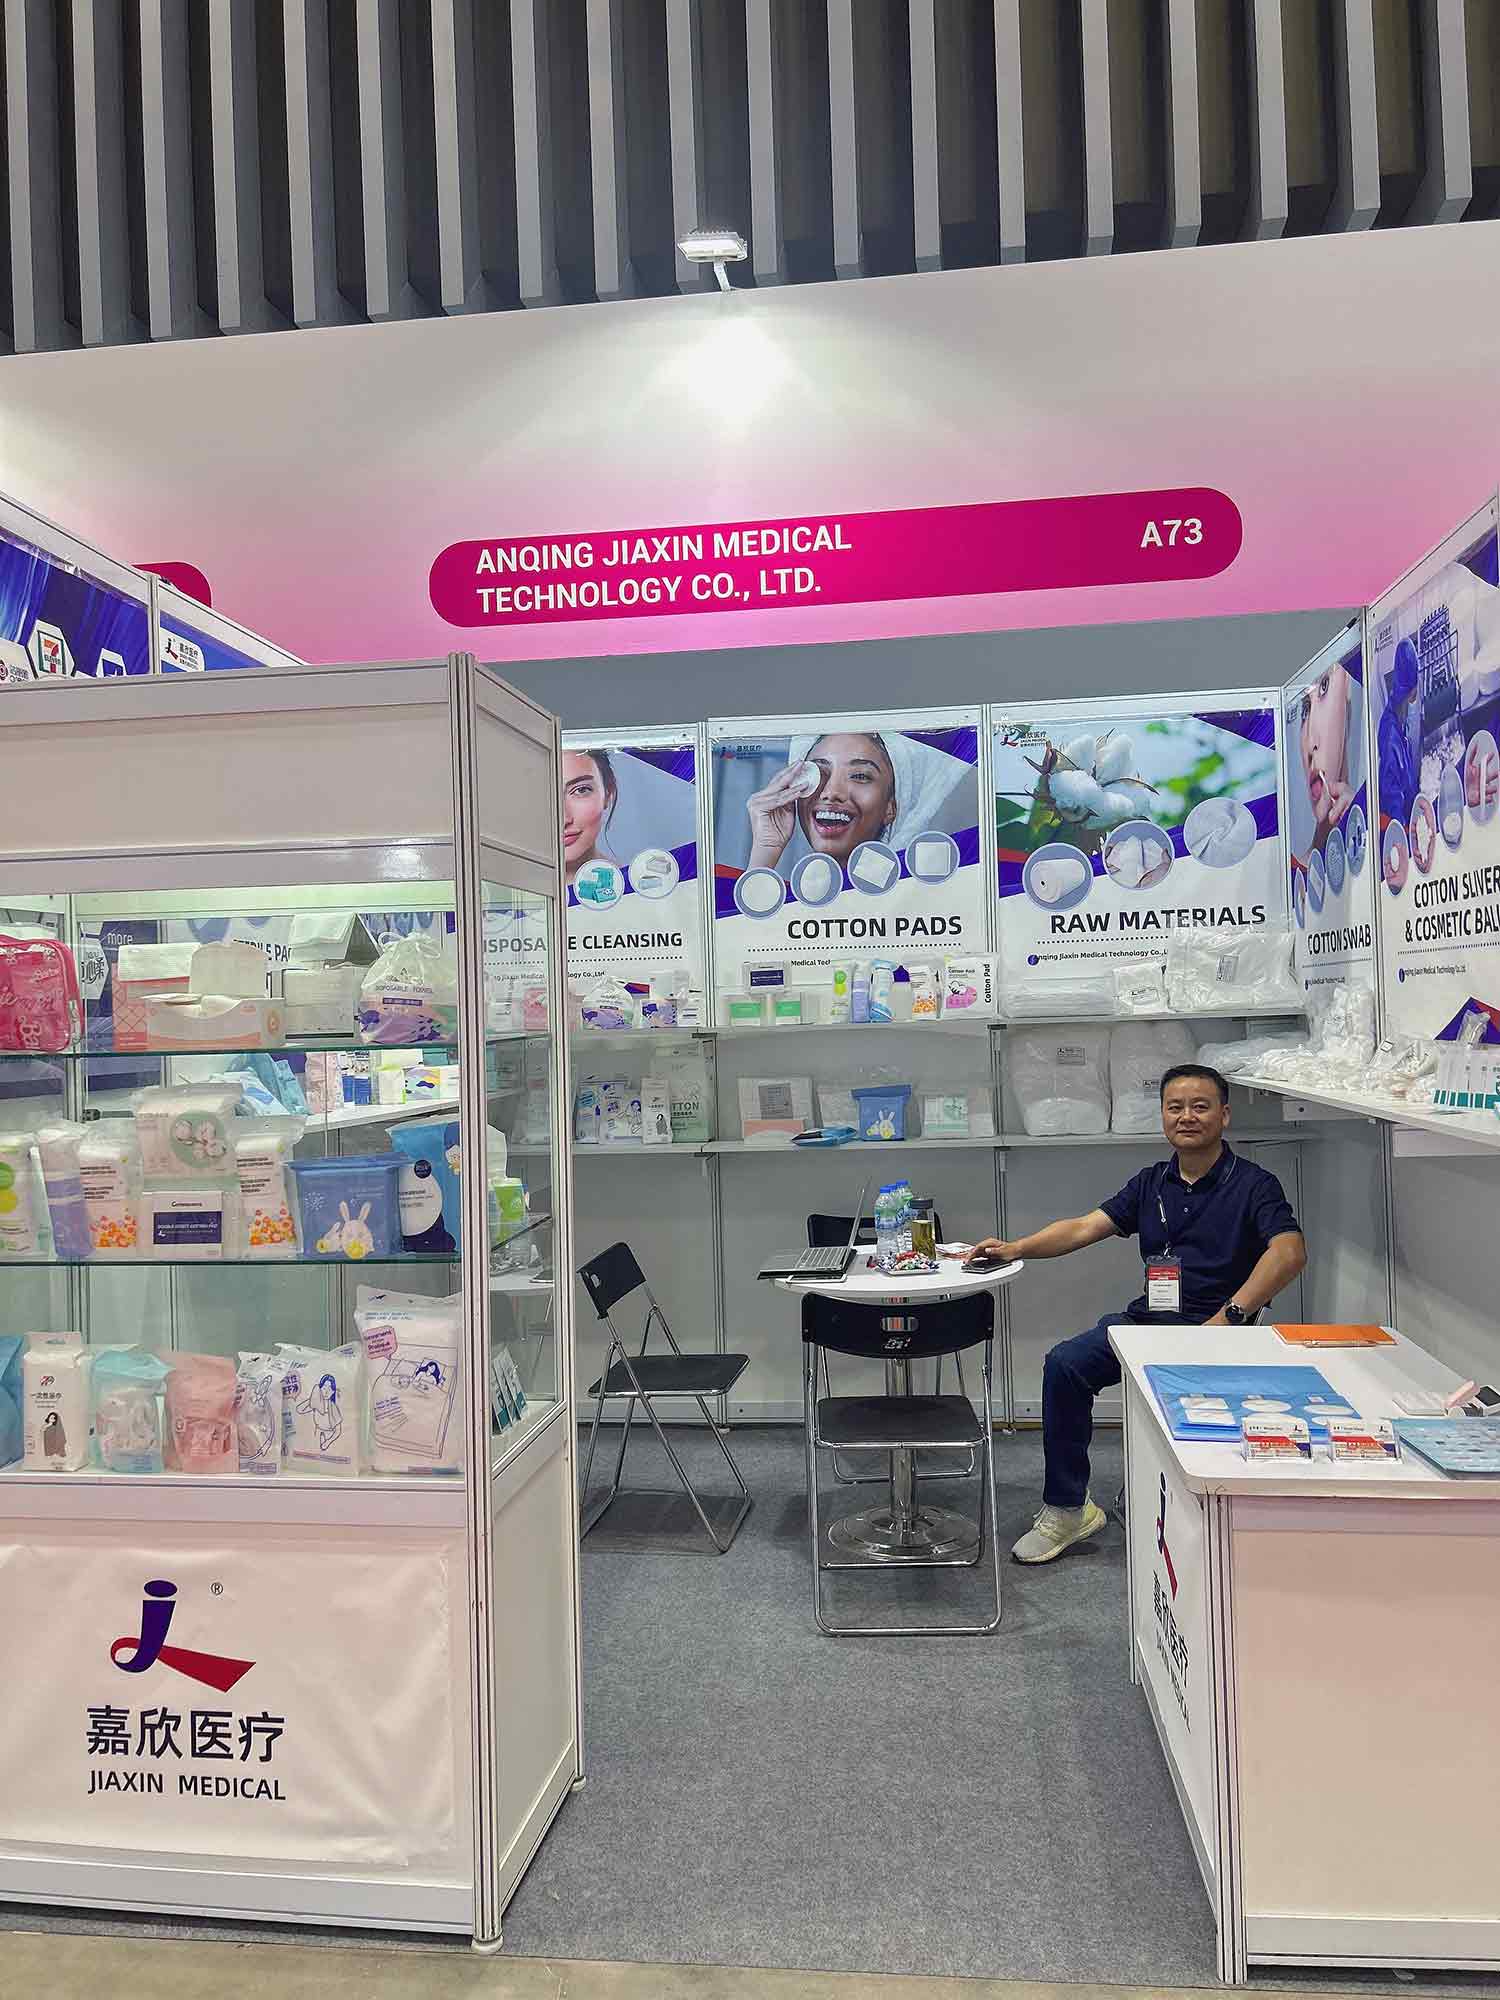 How about Jiaxin Medical at the Vietnam Exhibition?